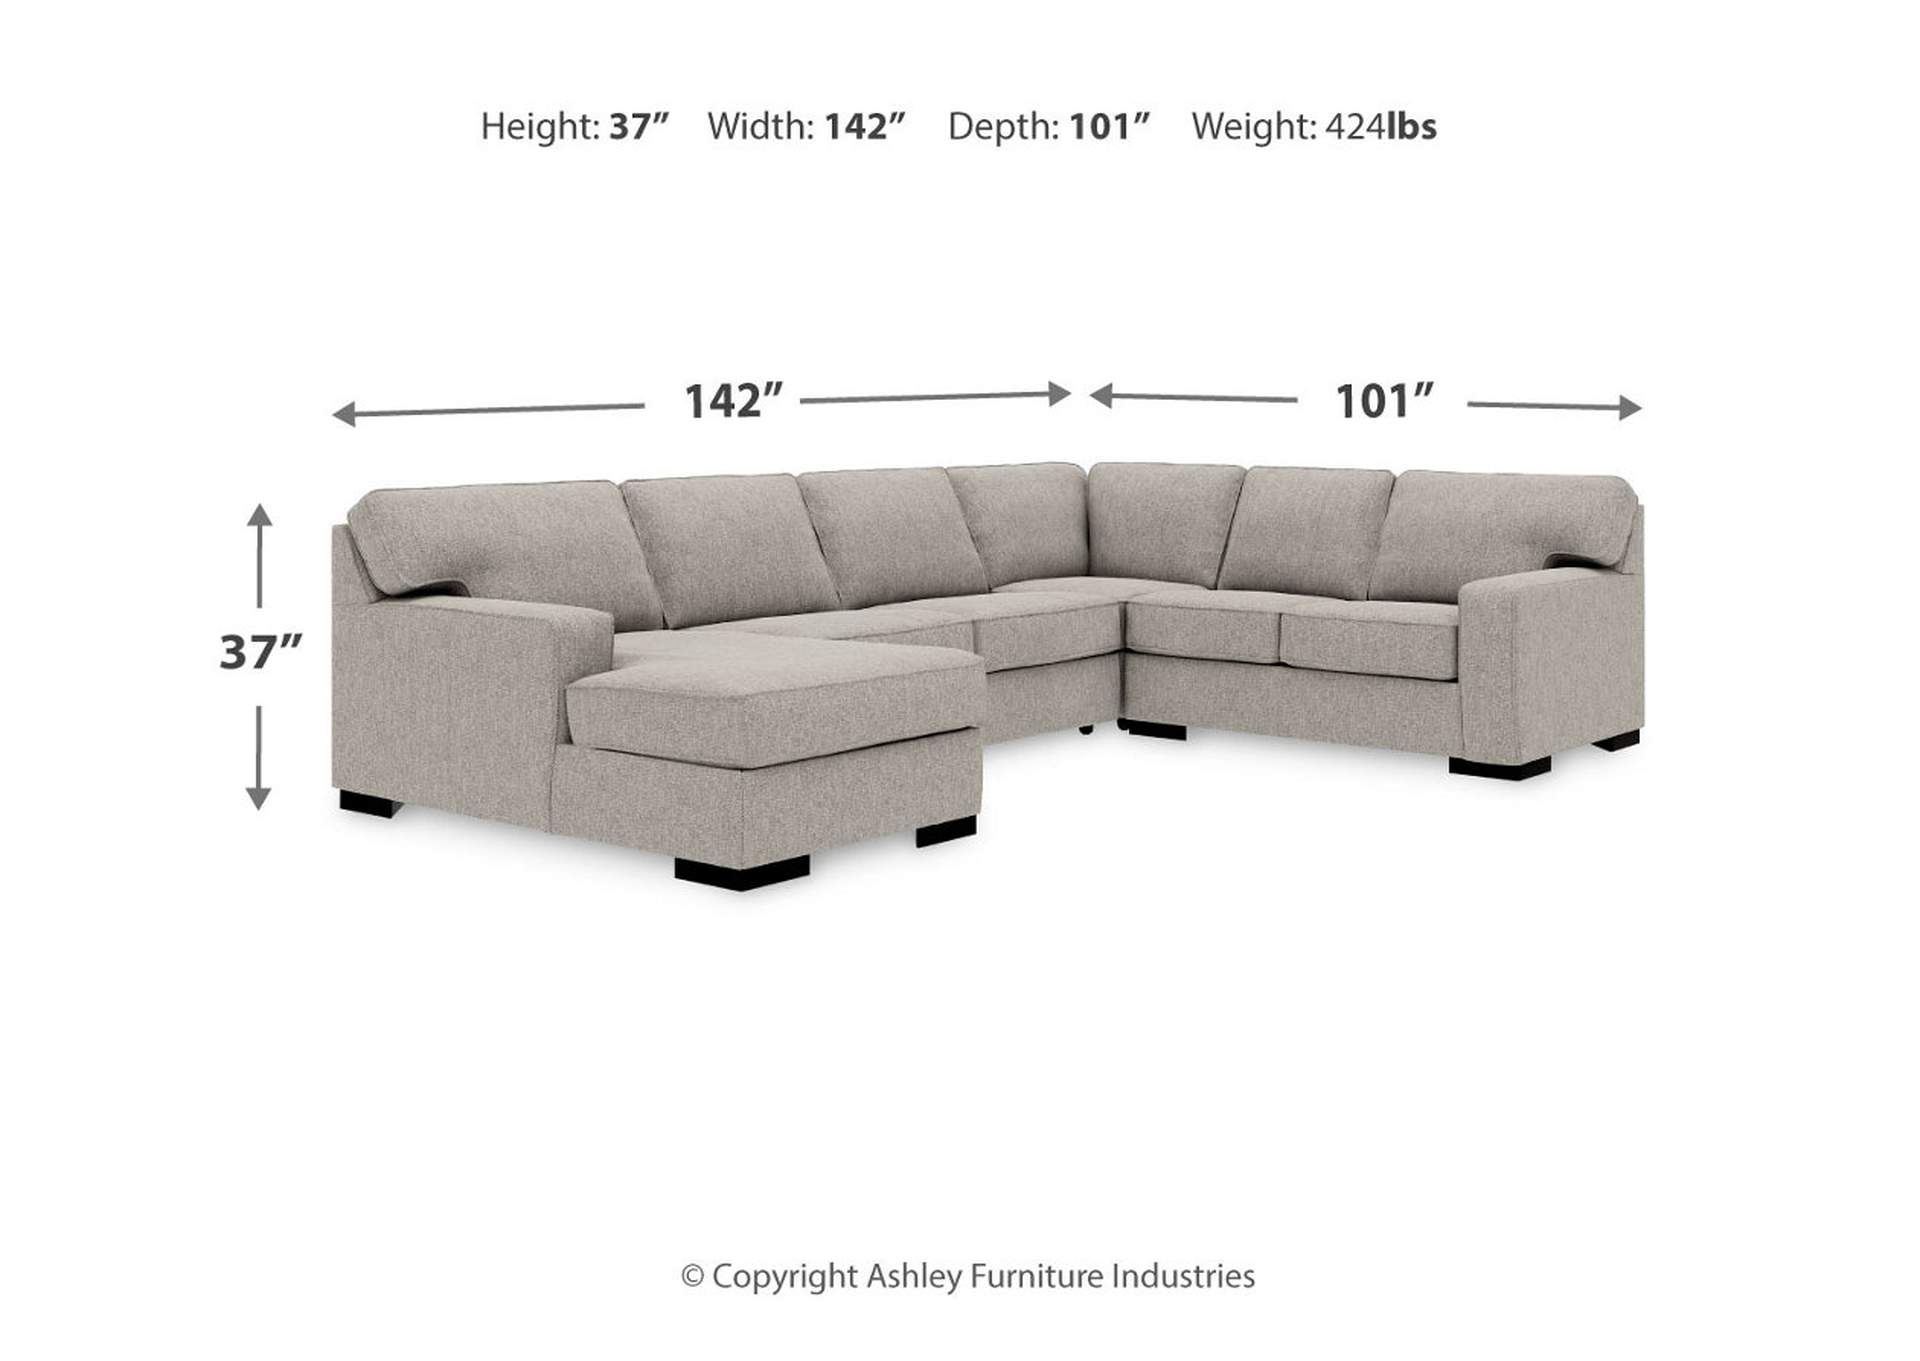 Ashlor Nuvella® 4-Piece Sleeper Sectional with Chaise,Ashley